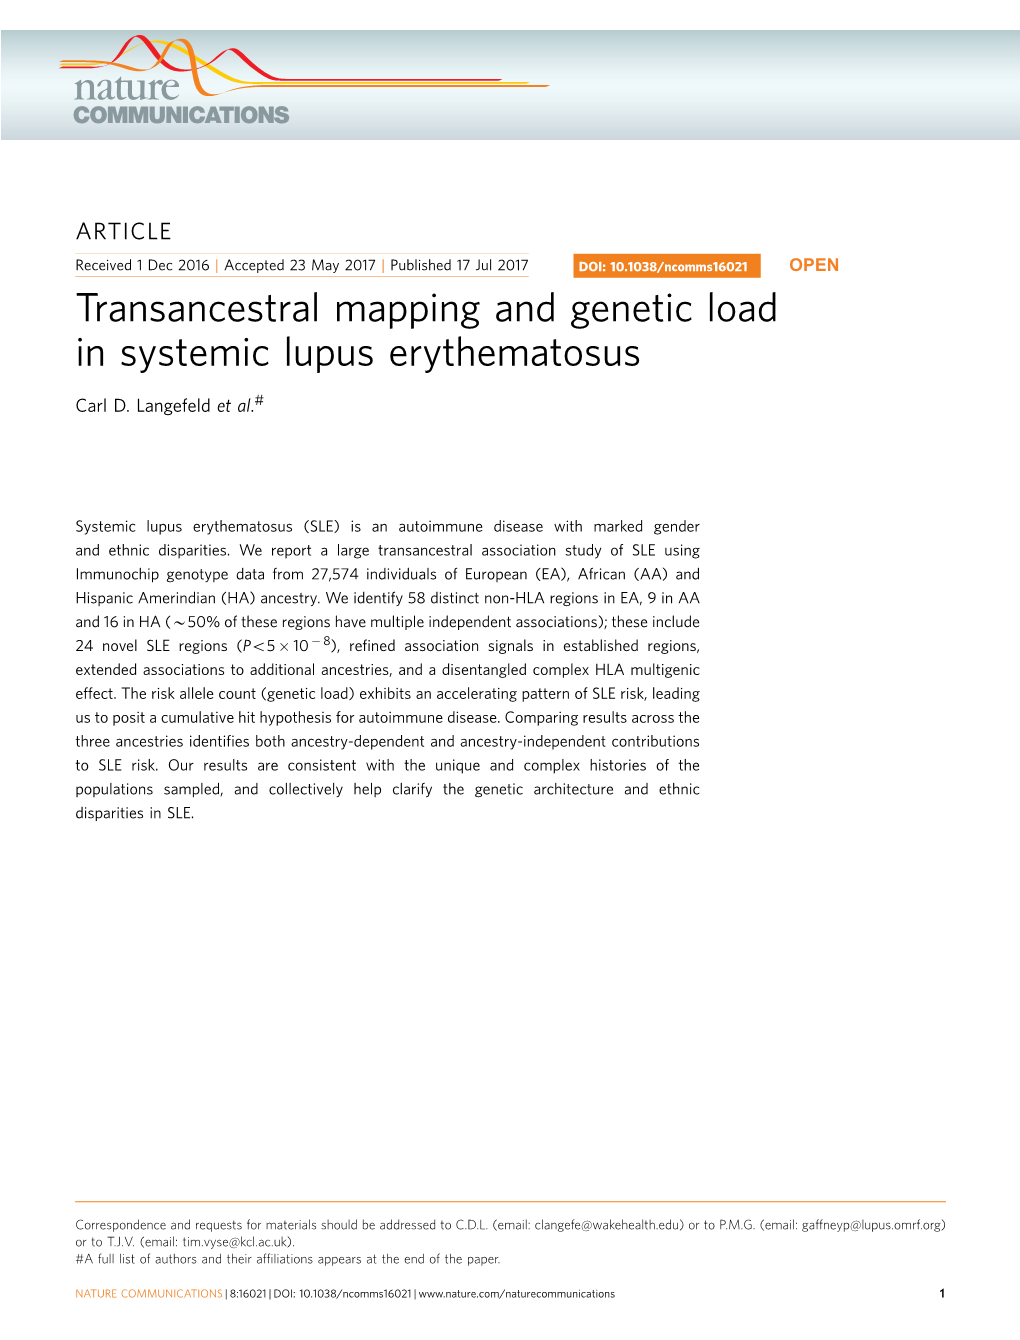 Transancestral Mapping and Genetic Load in Systemic Lupus Erythematosus